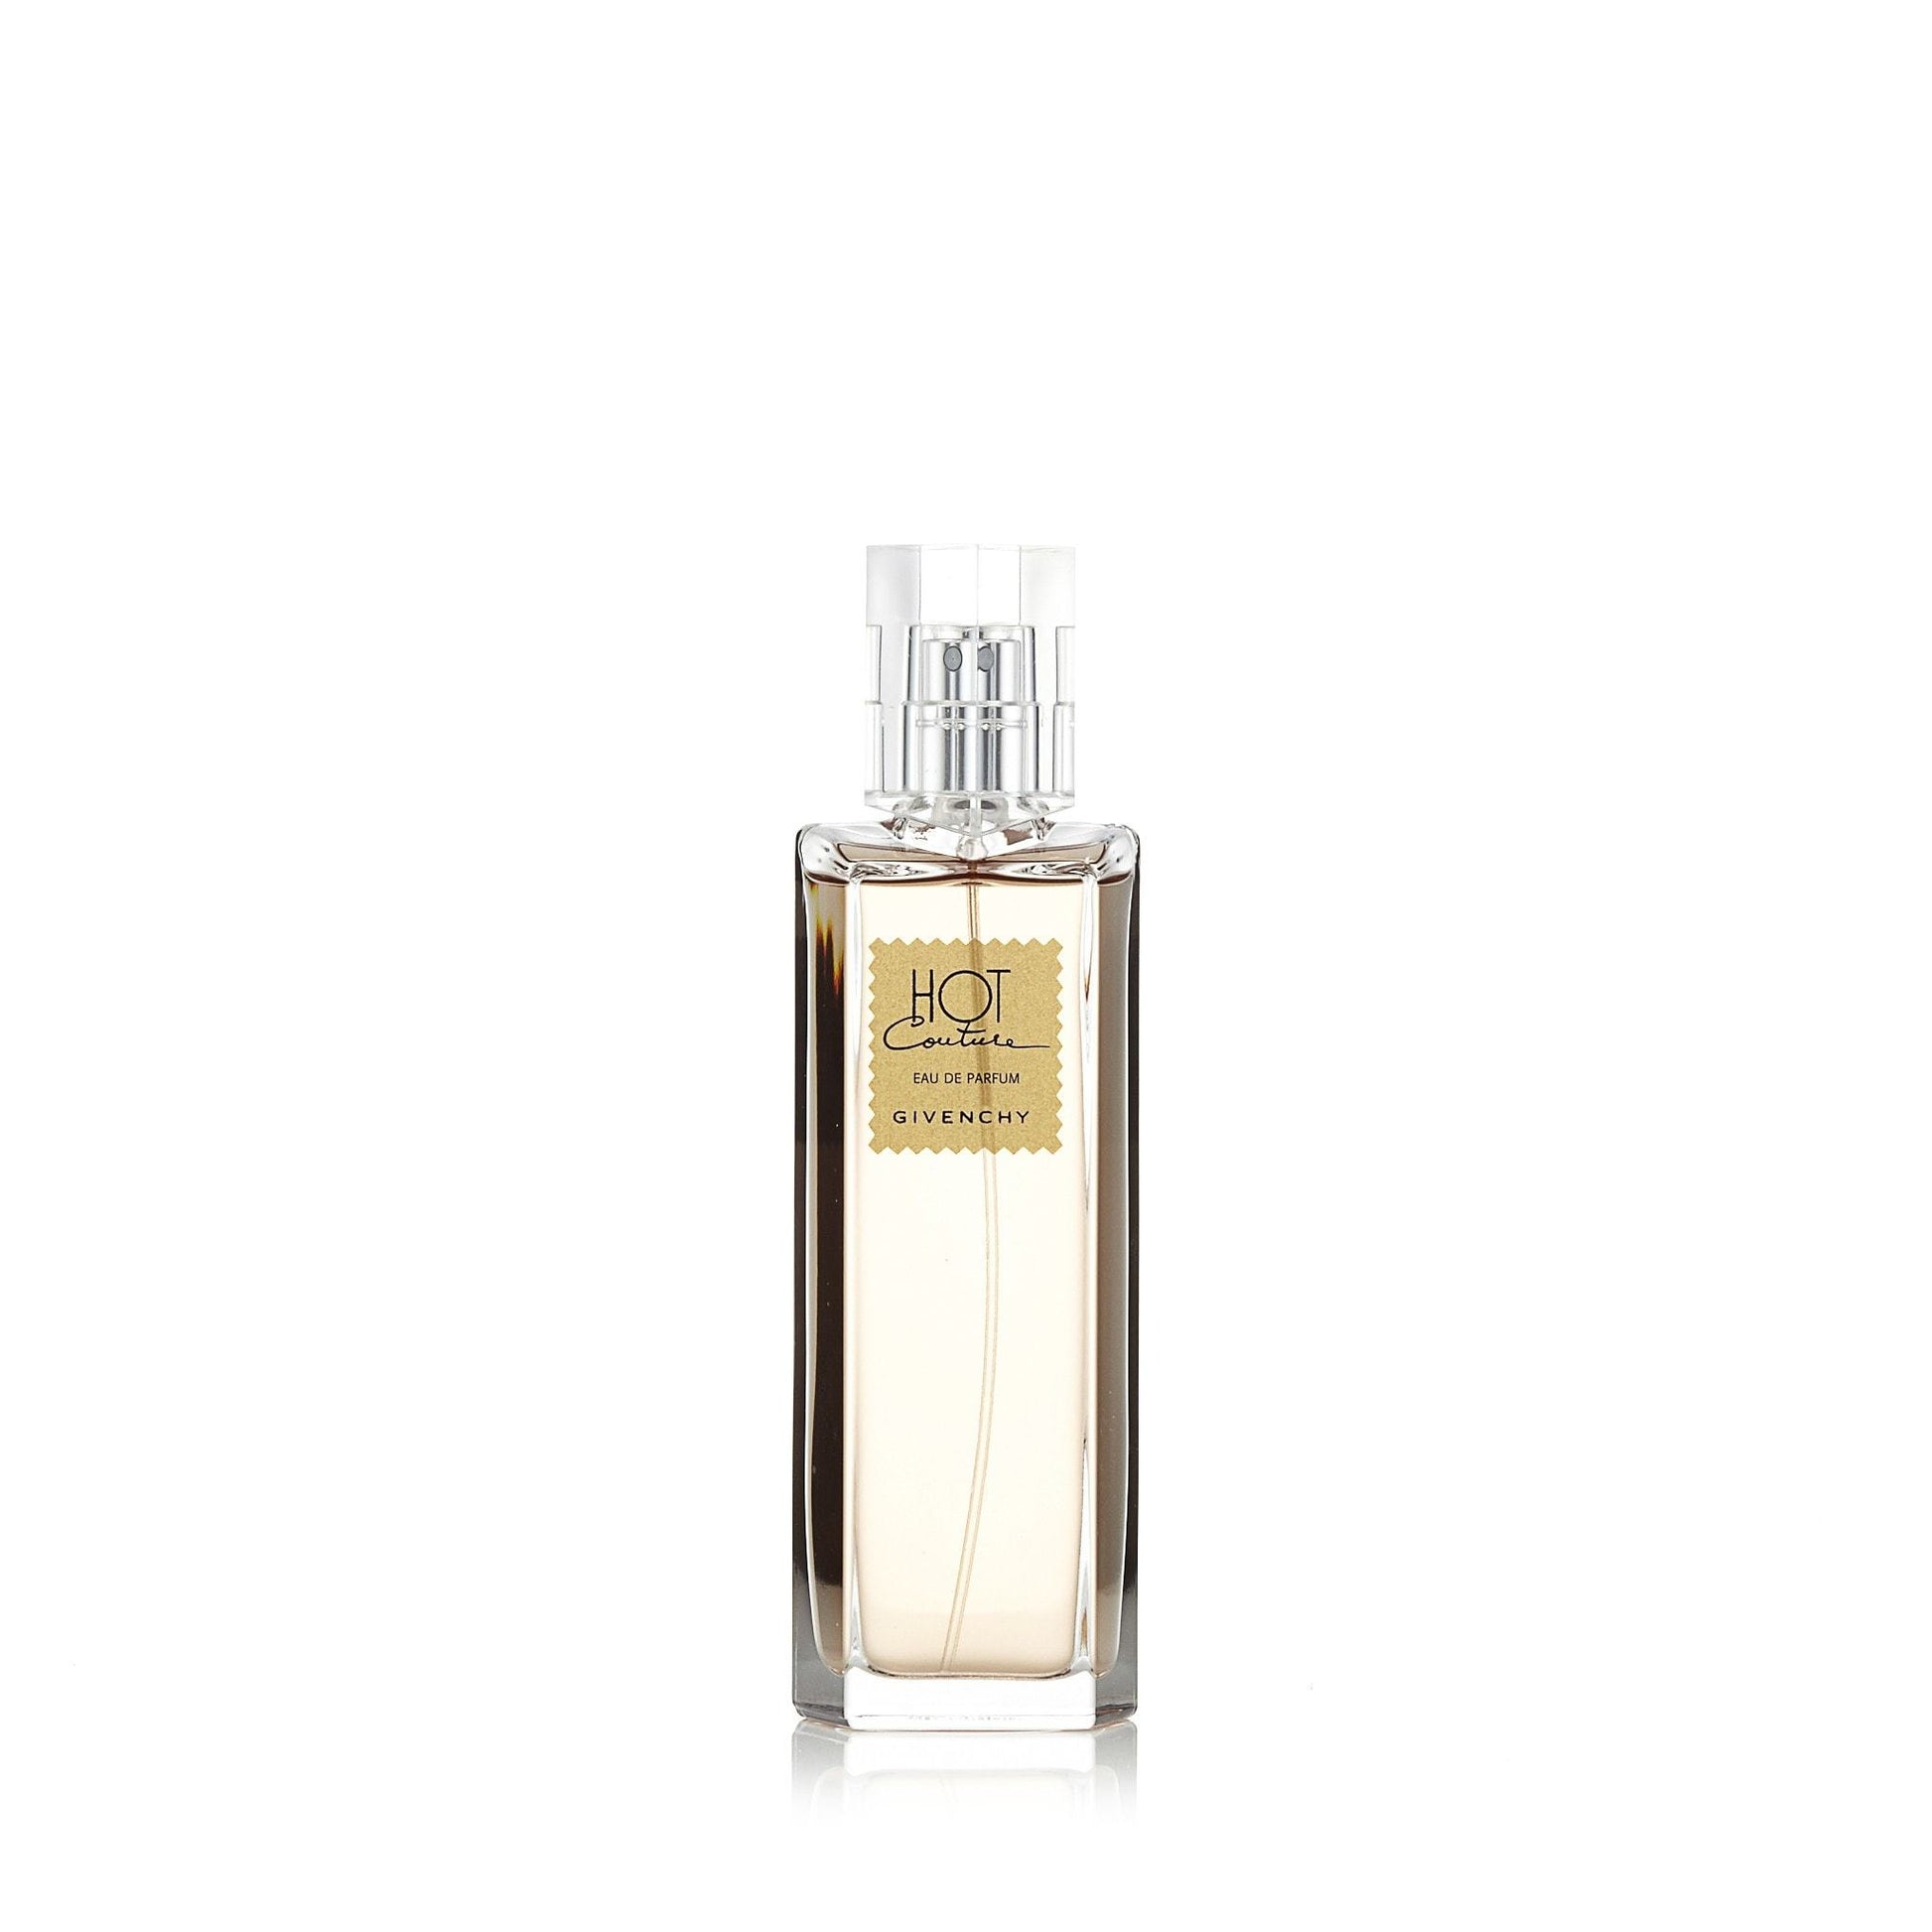 Hot Couture Eau de Parfum Spray for Women by Givenchy, Product image 2